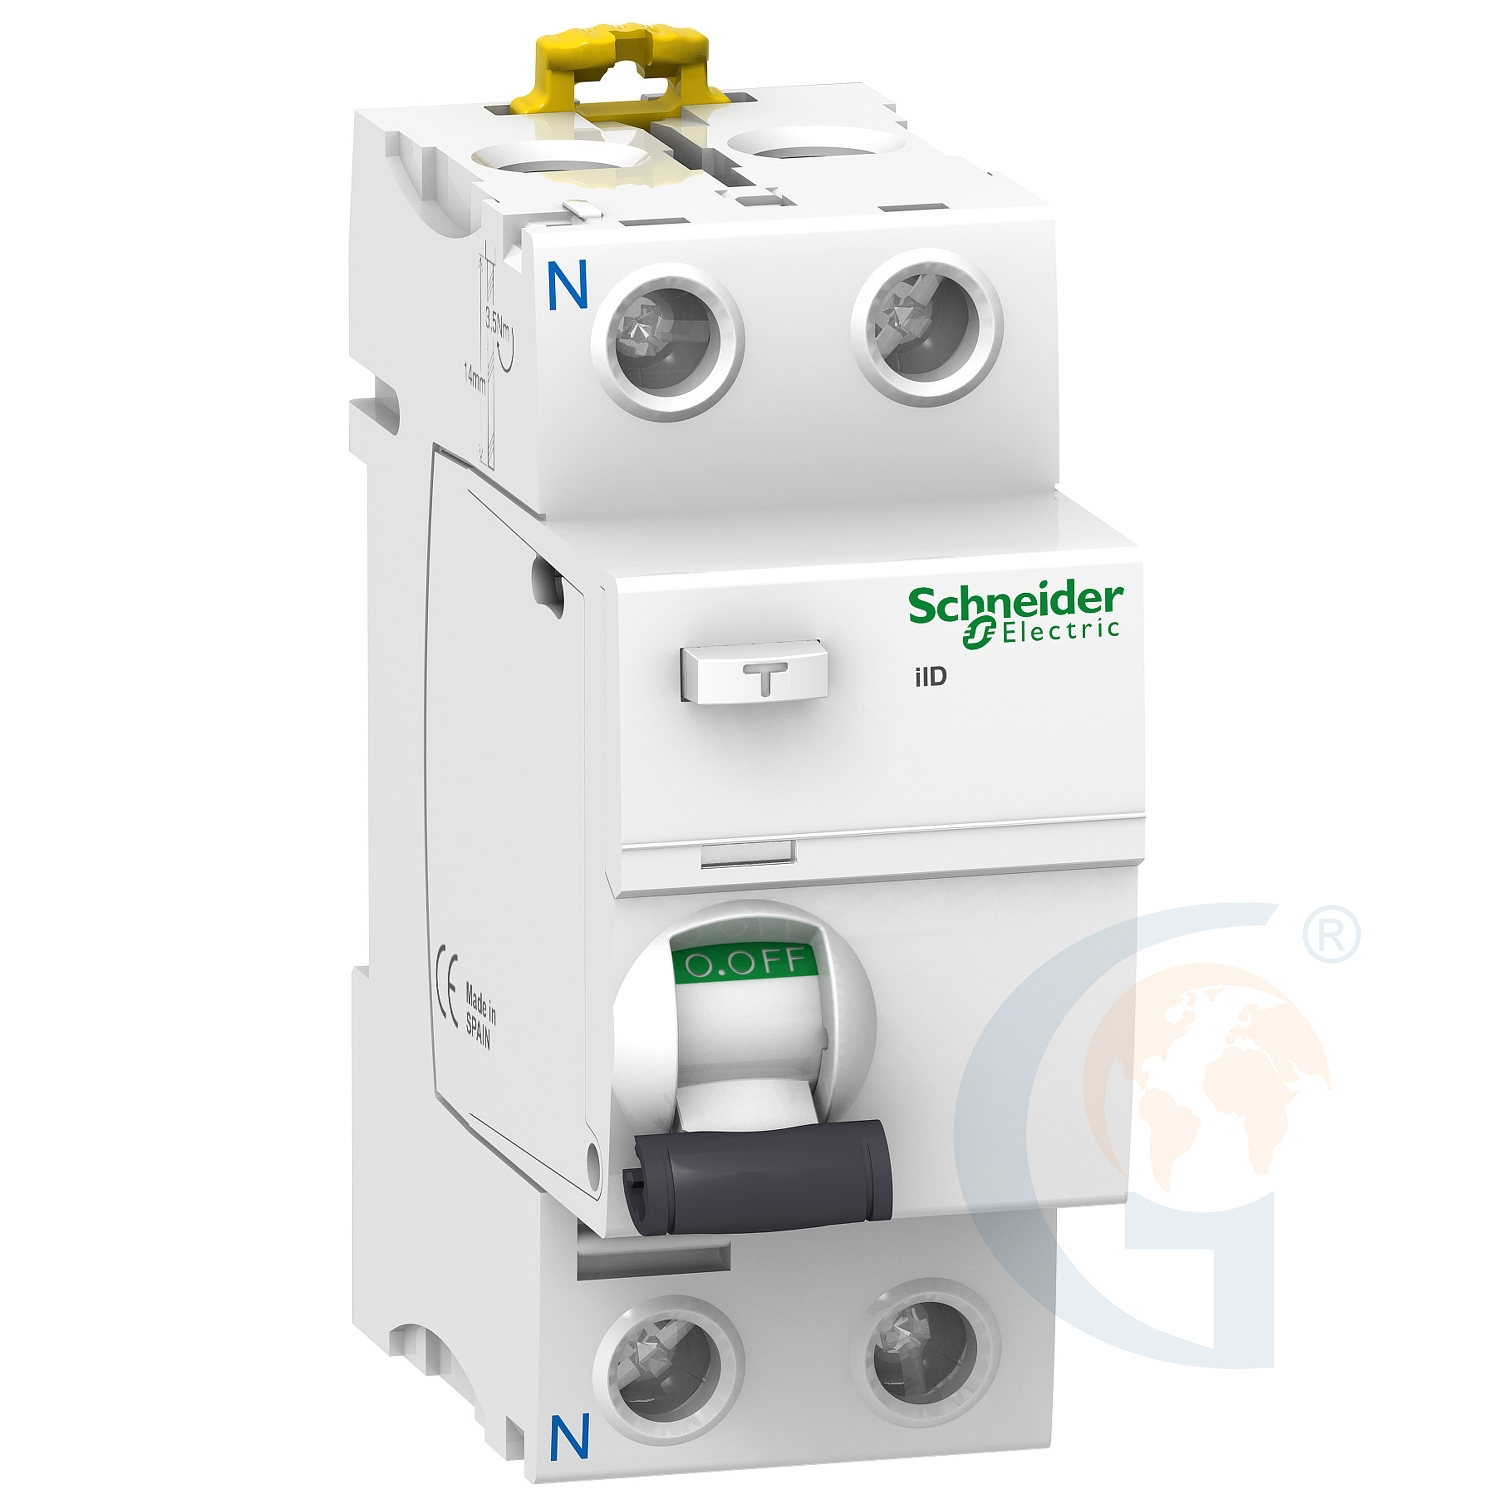 Schneider Electric A9R01263 ACTI 9 IID – RCCB – 2P – 63A – 30MA – TYPE A https://gesrepair.com/wp-content/uploads/2020/Schneider/Schneider_Electric_A9R01263_.jpg